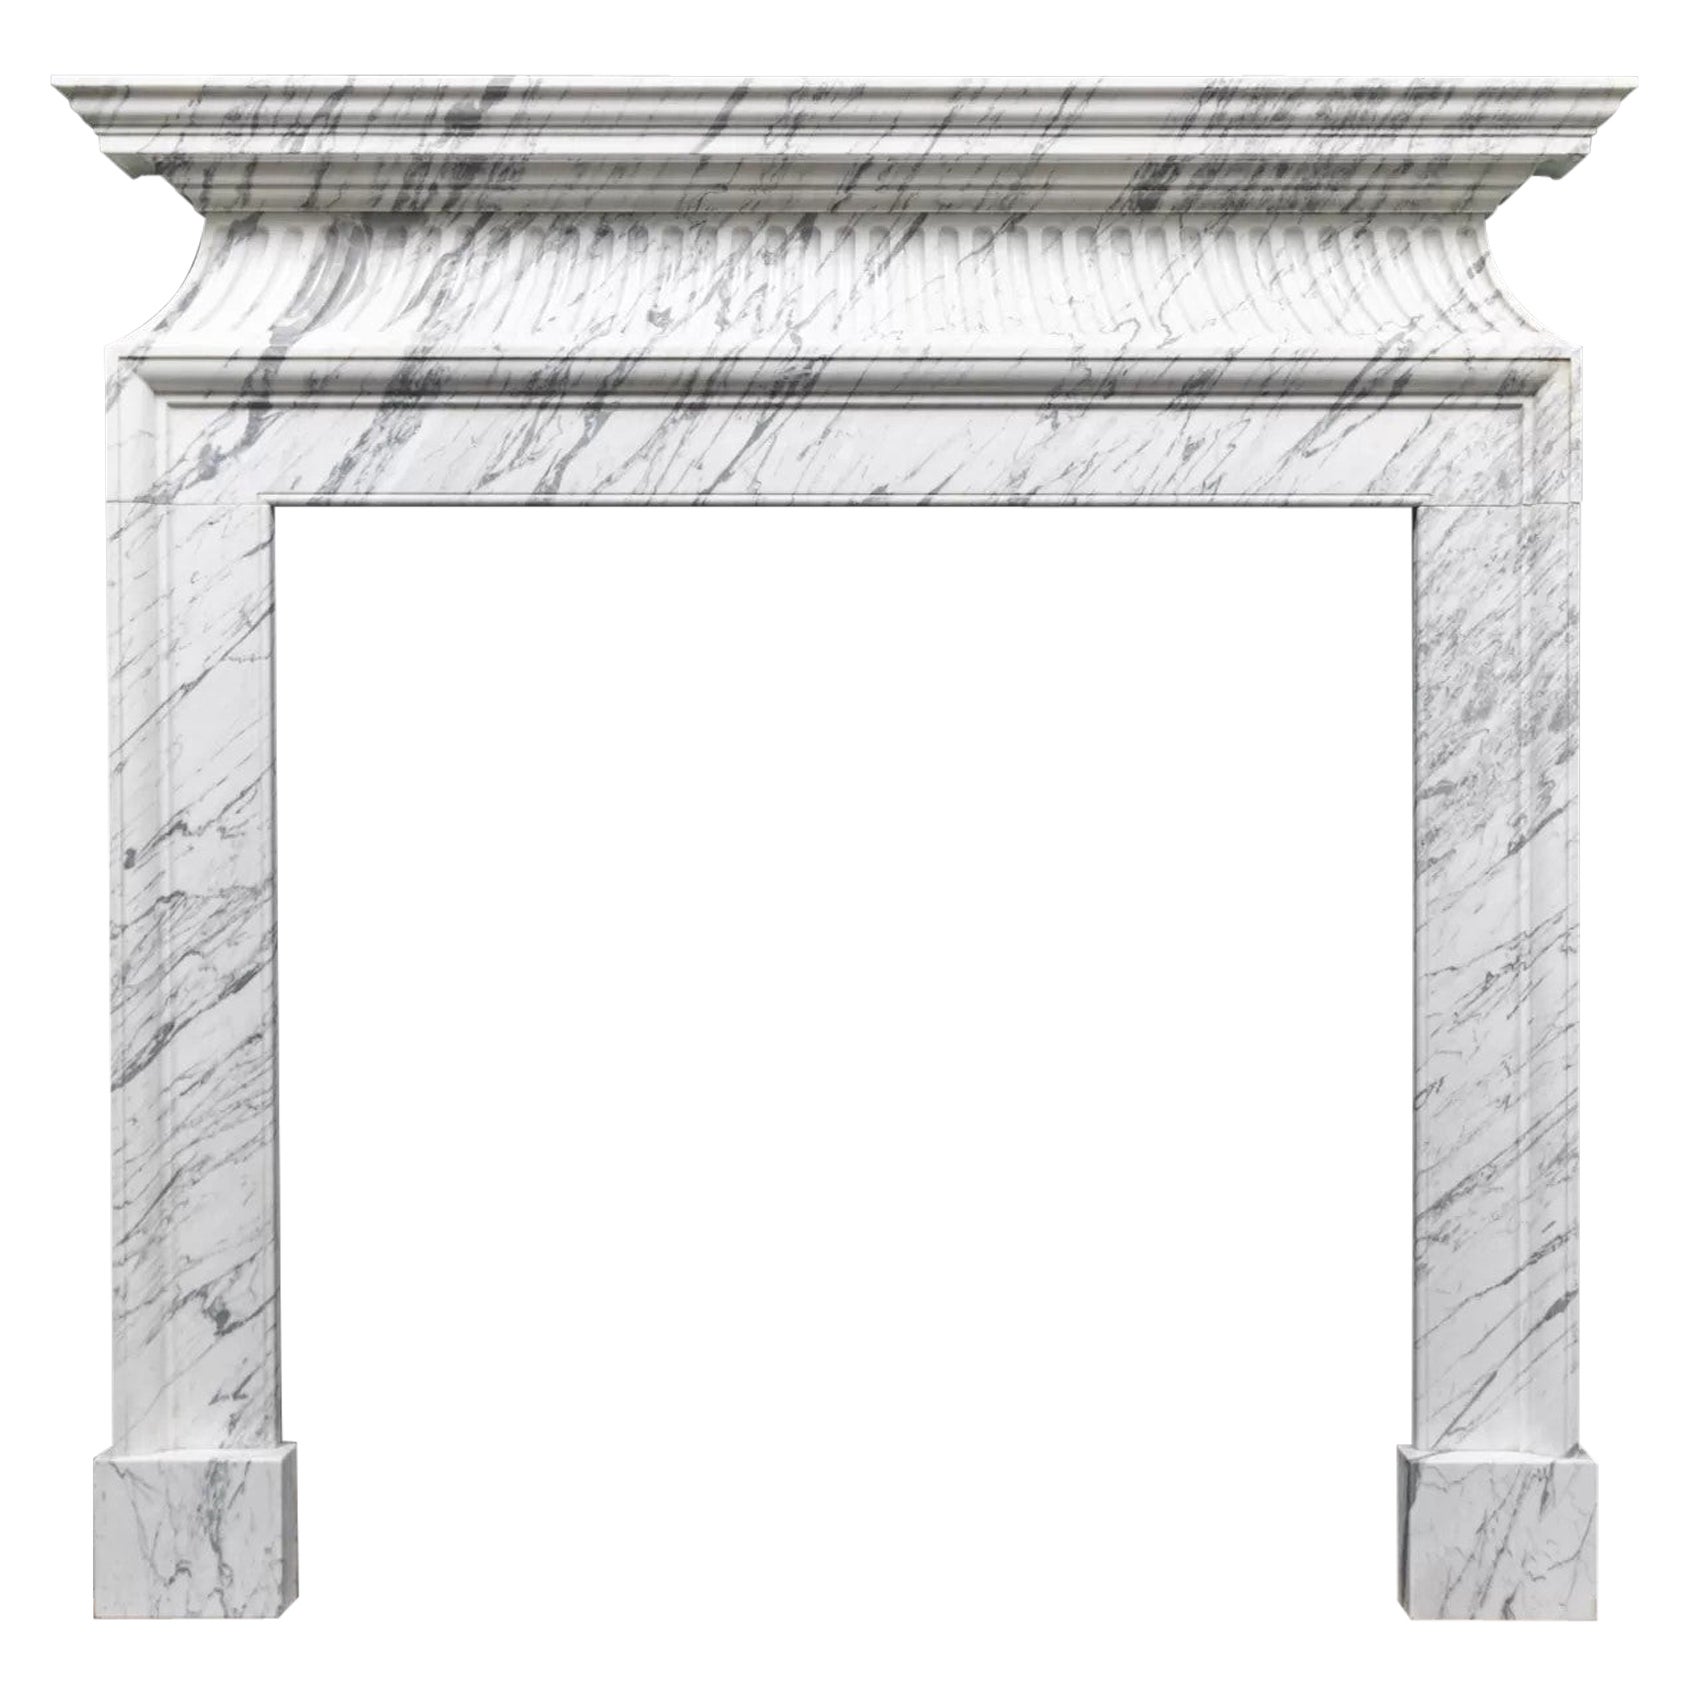 A neoclassical style fire surround in Italian Carrara Marble by Ryan and Smith